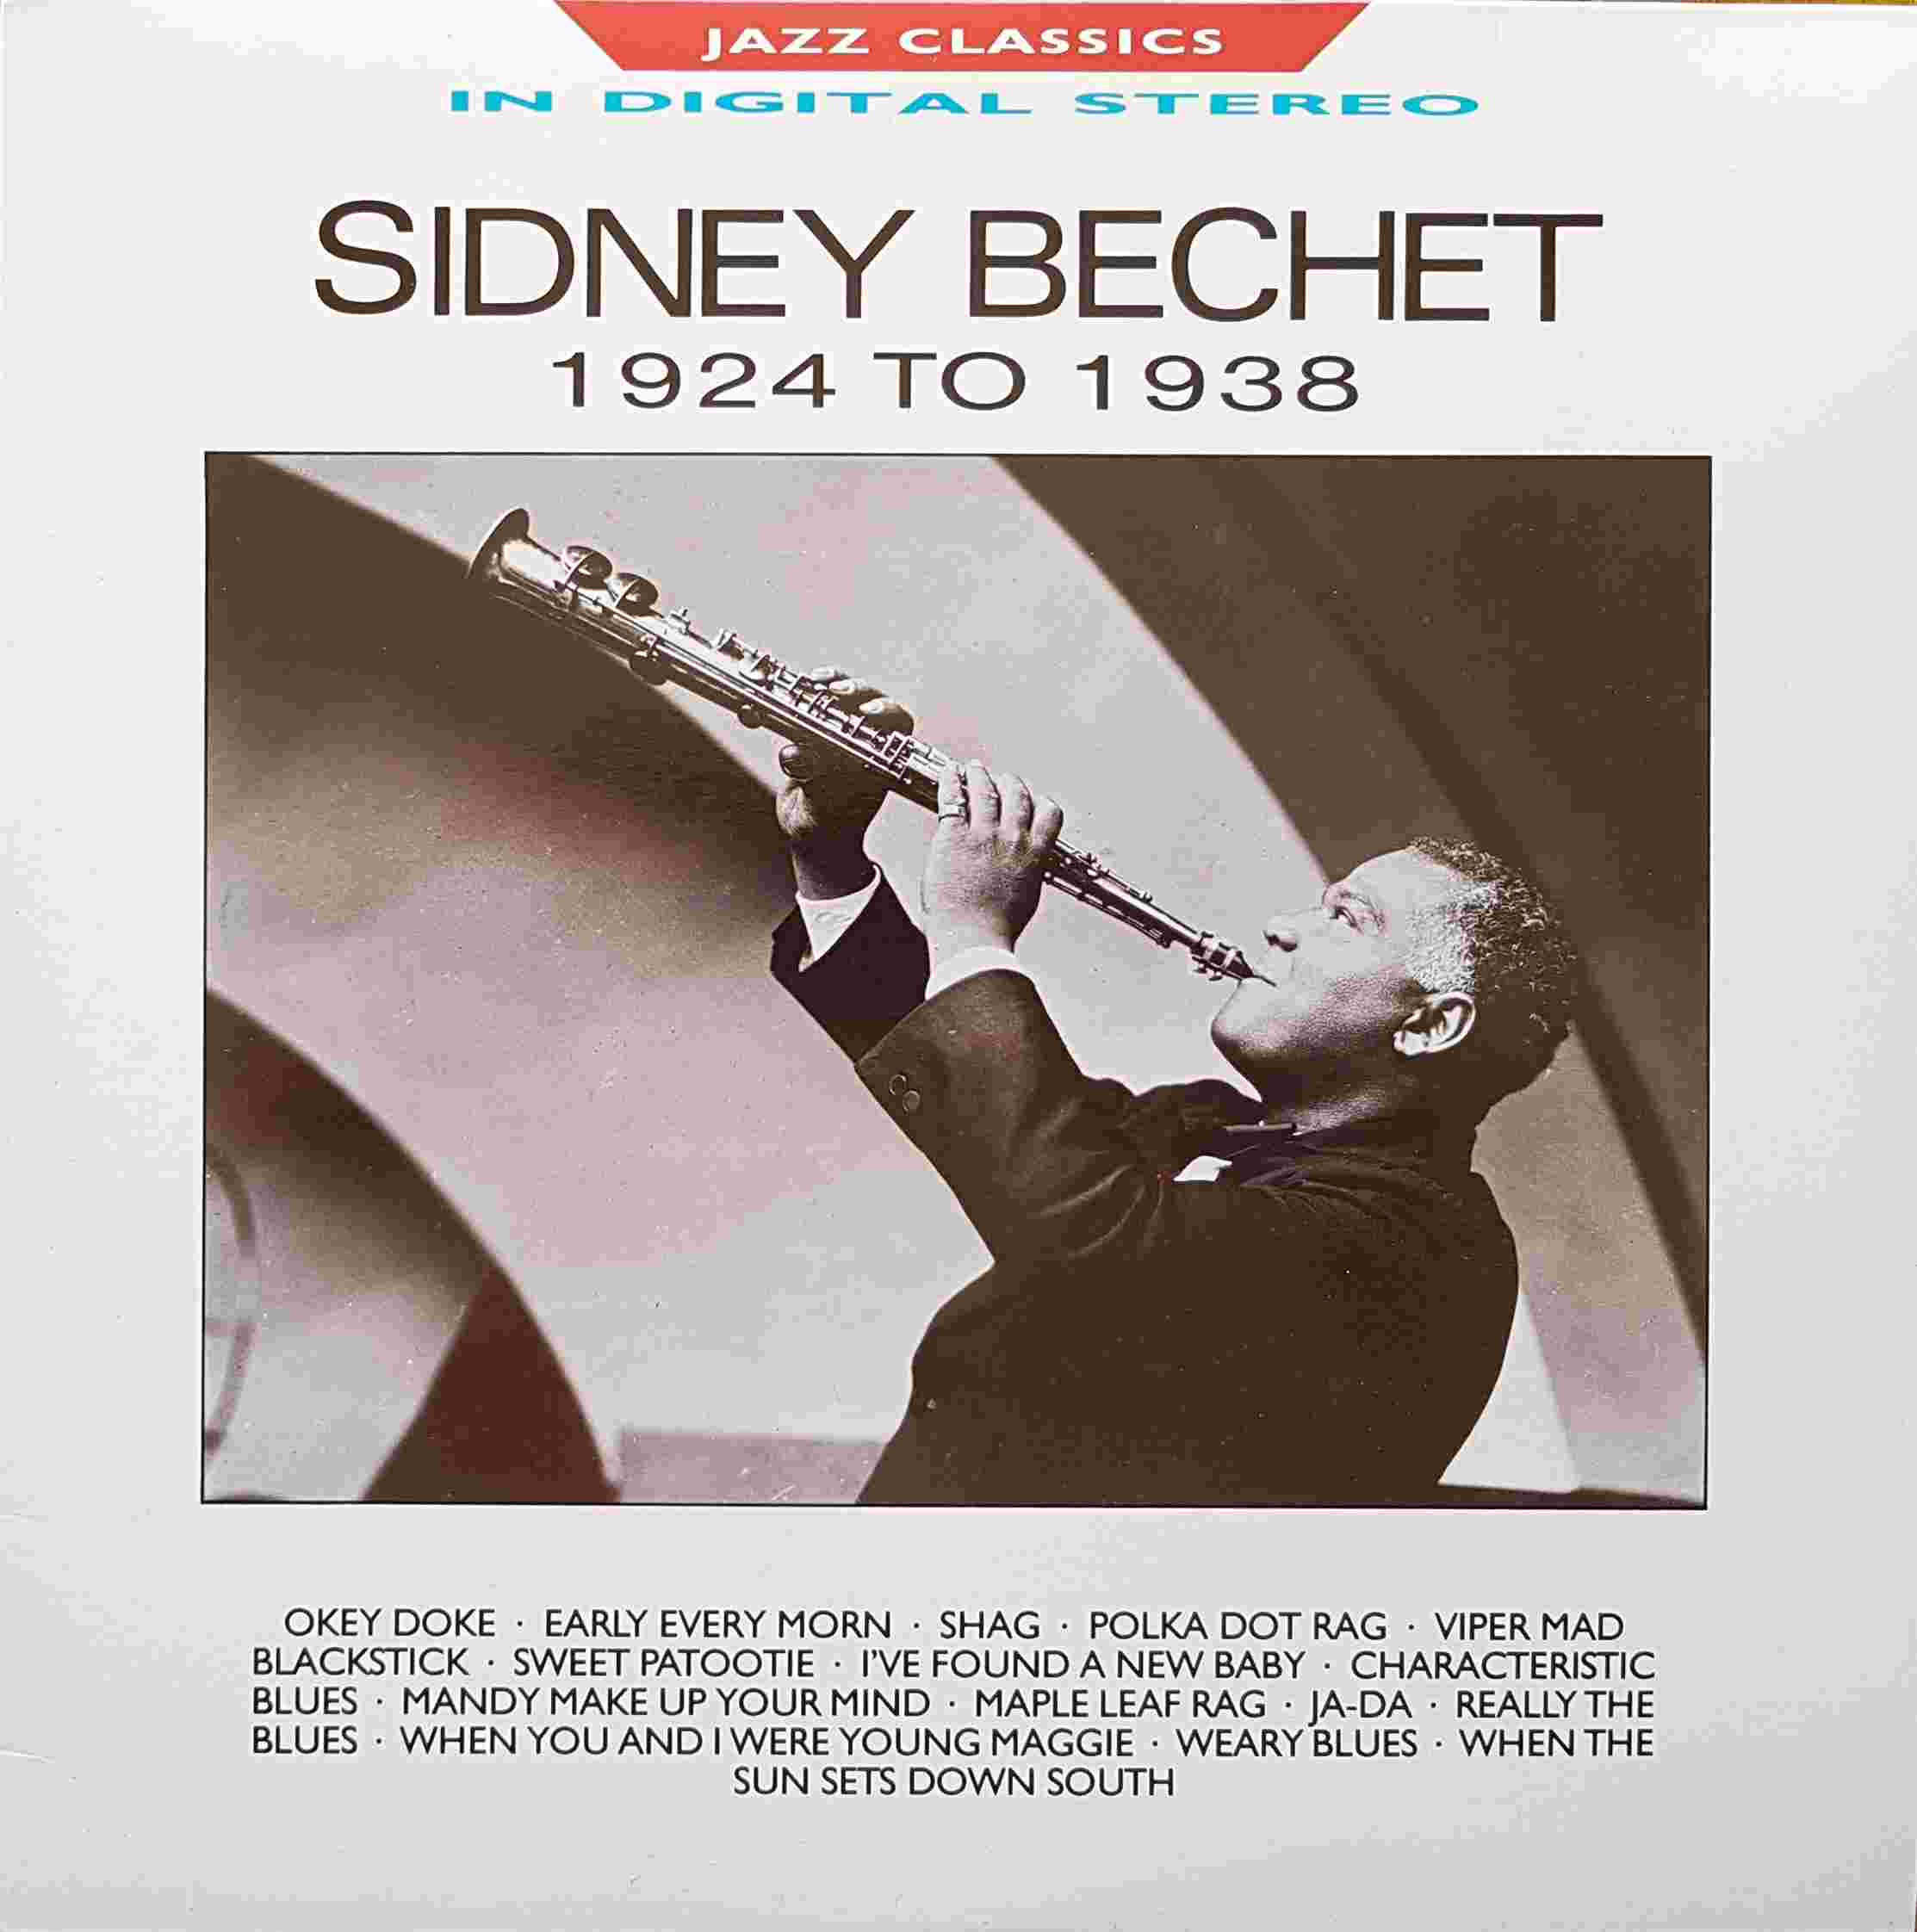 Picture of REB 700 Jazz classics - Sidney Bechet 1925 - 1928 by artist Sidney Bechet  from the BBC albums - Records and Tapes library